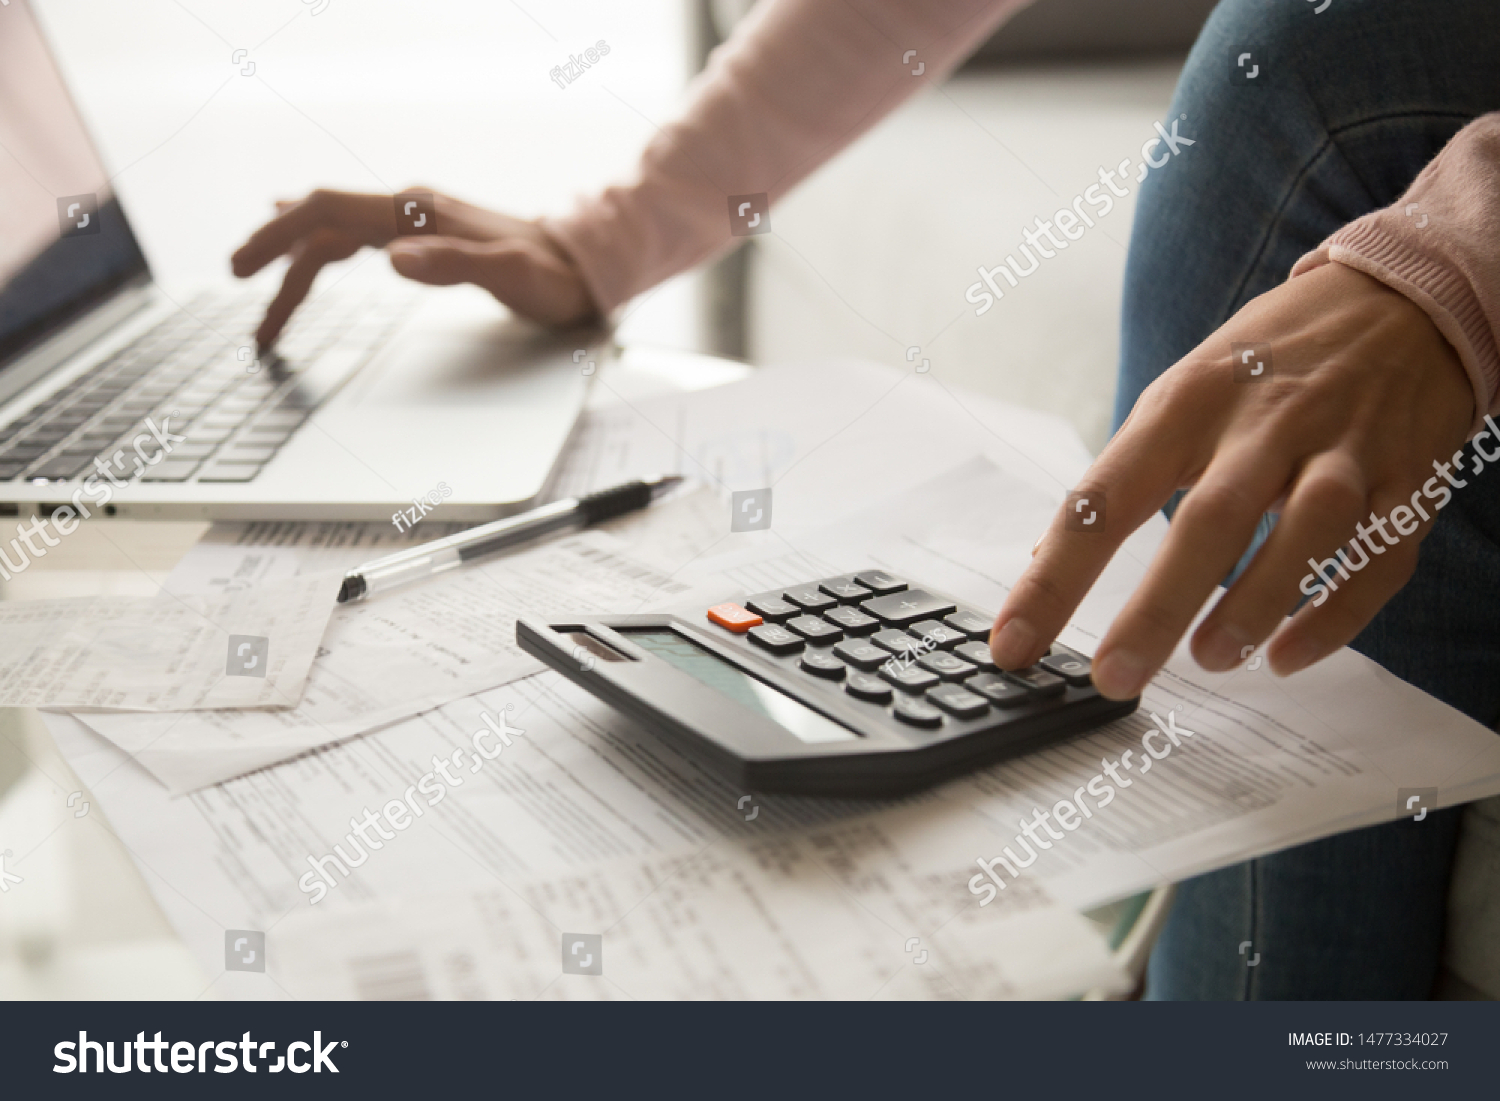 Close up cropped image young woman calculating monthly expenses, managing budget, entering data in computer application, sitting at table full of papers, loan documents, invoices, utility bills. #1477334027